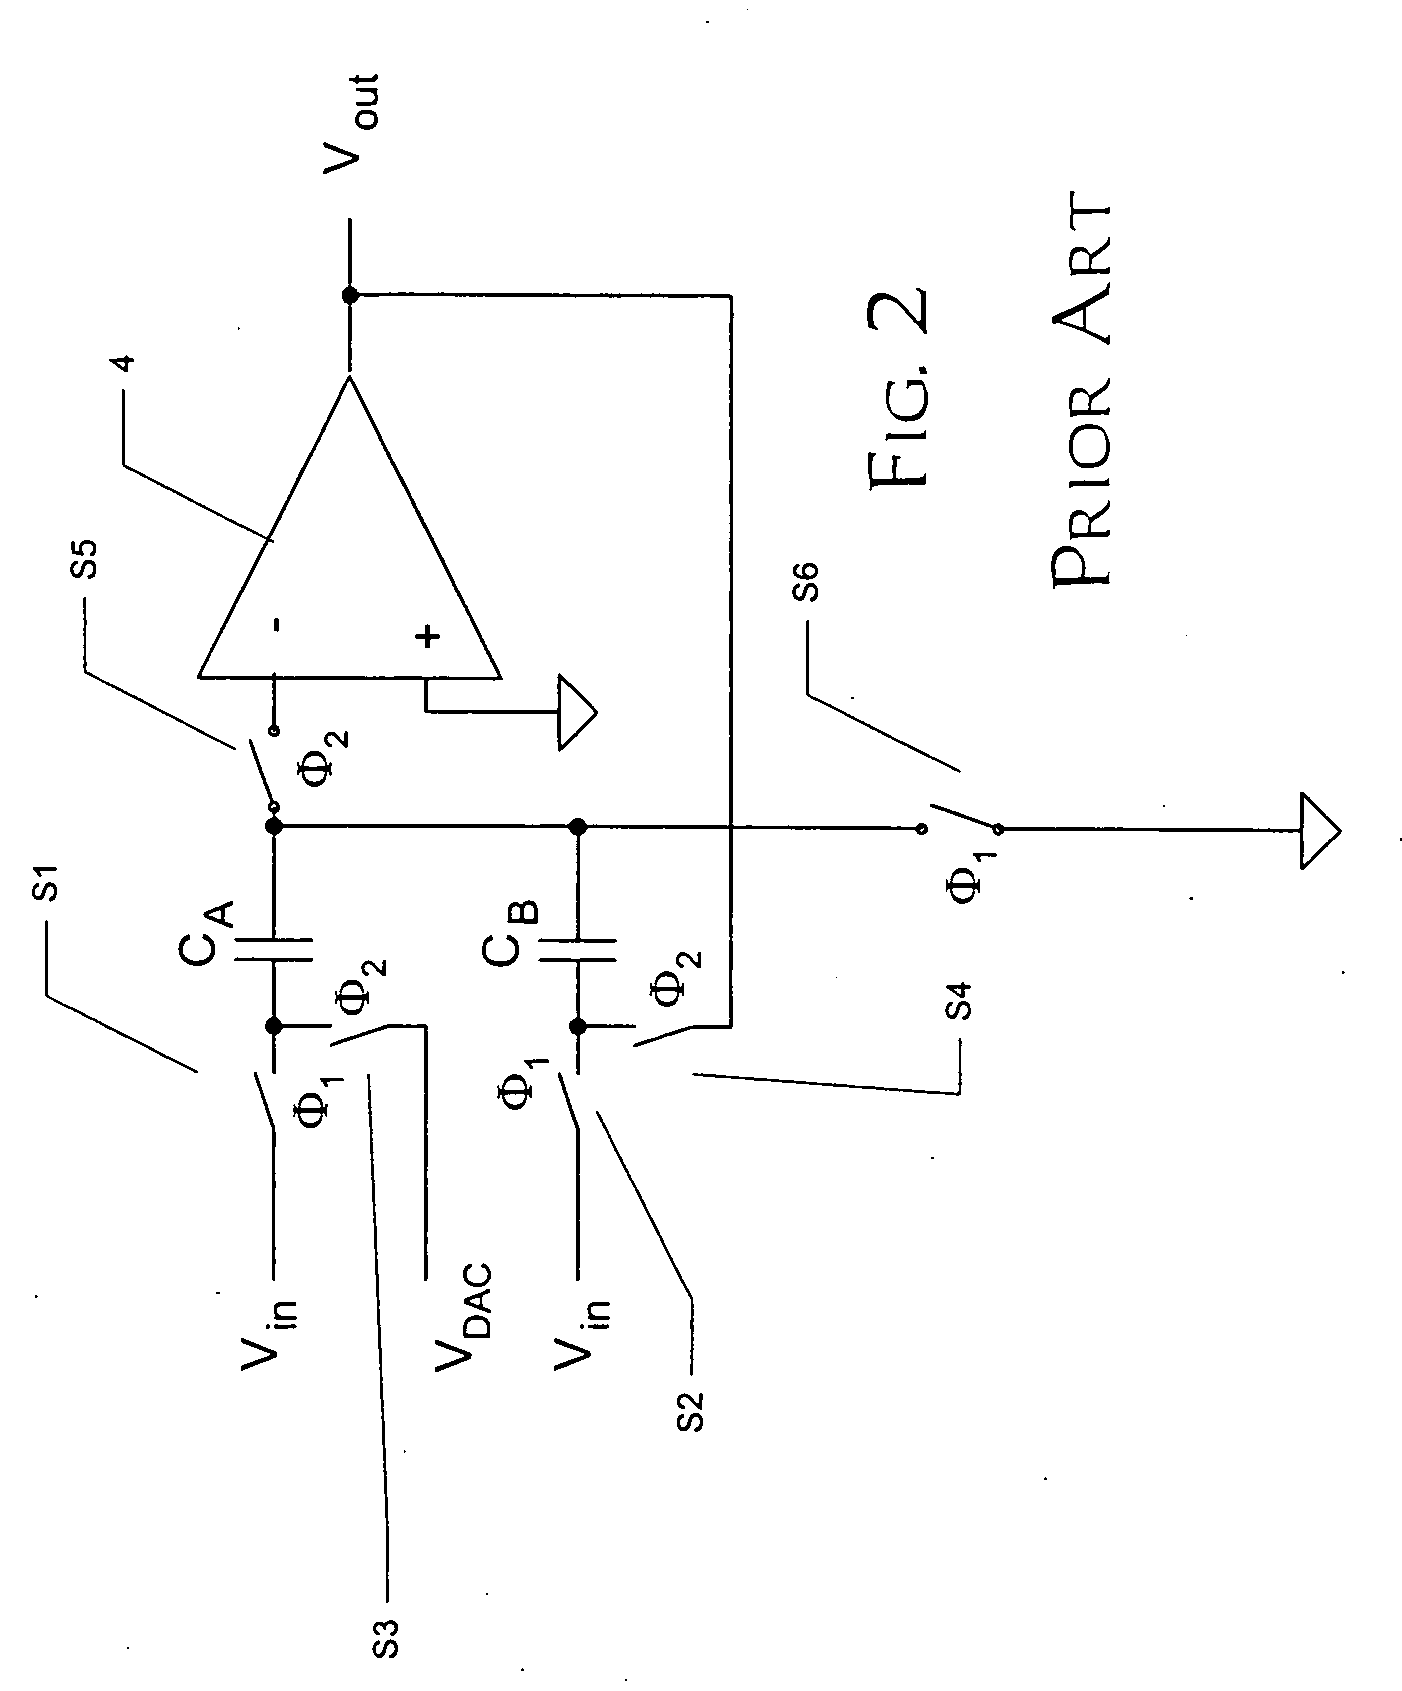 Switched-capacitor circuits with reduced finite-gain effect